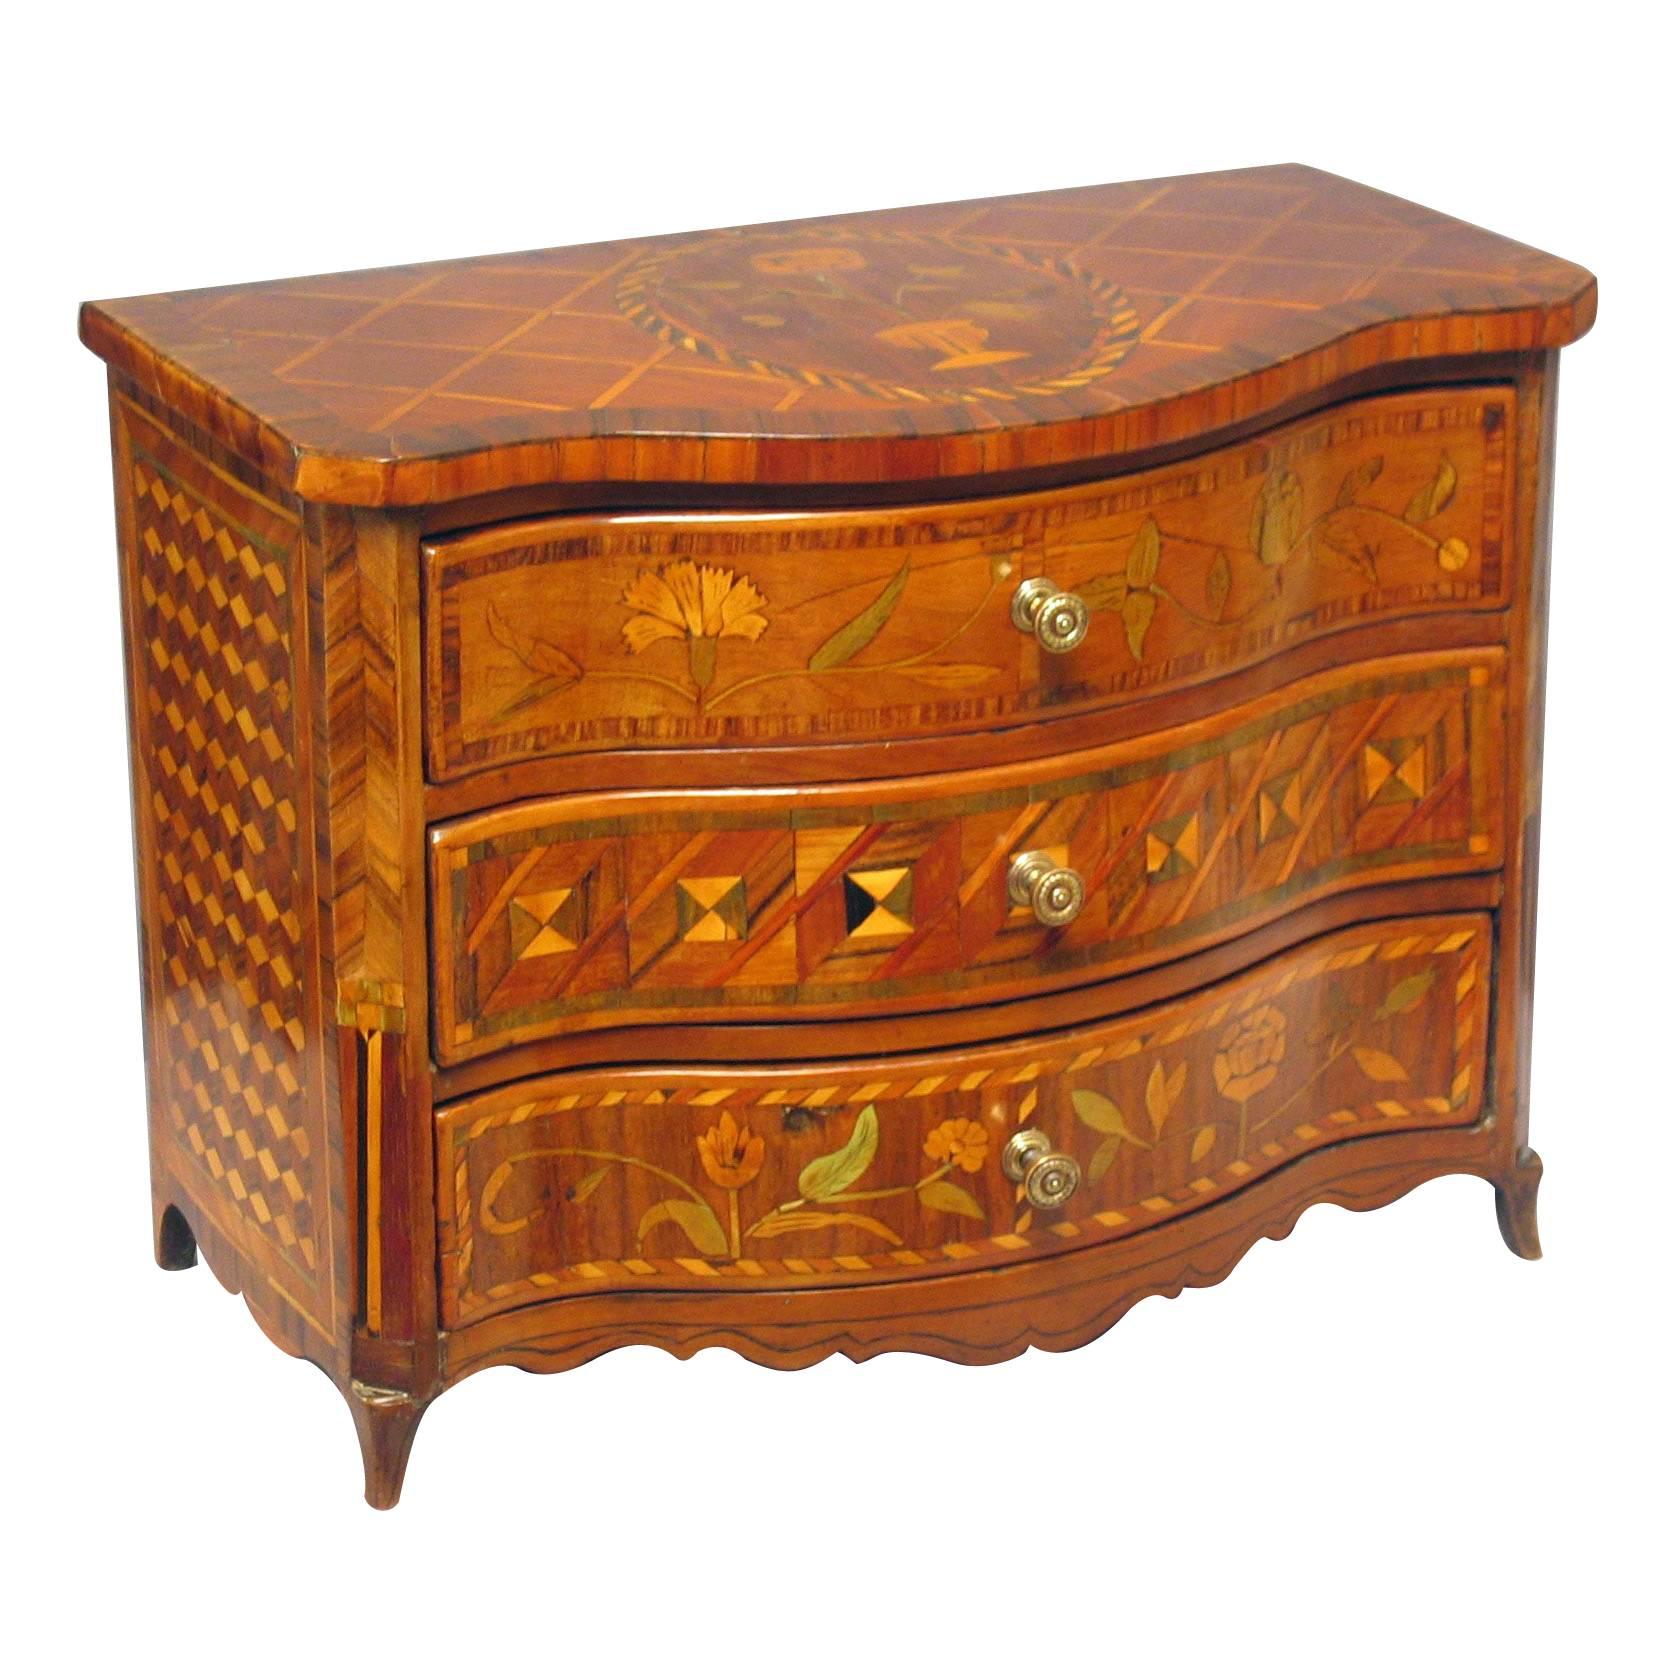 Rococo South German Miniature Marquetry and Parquetry Commode, Mid-18th Century For Sale